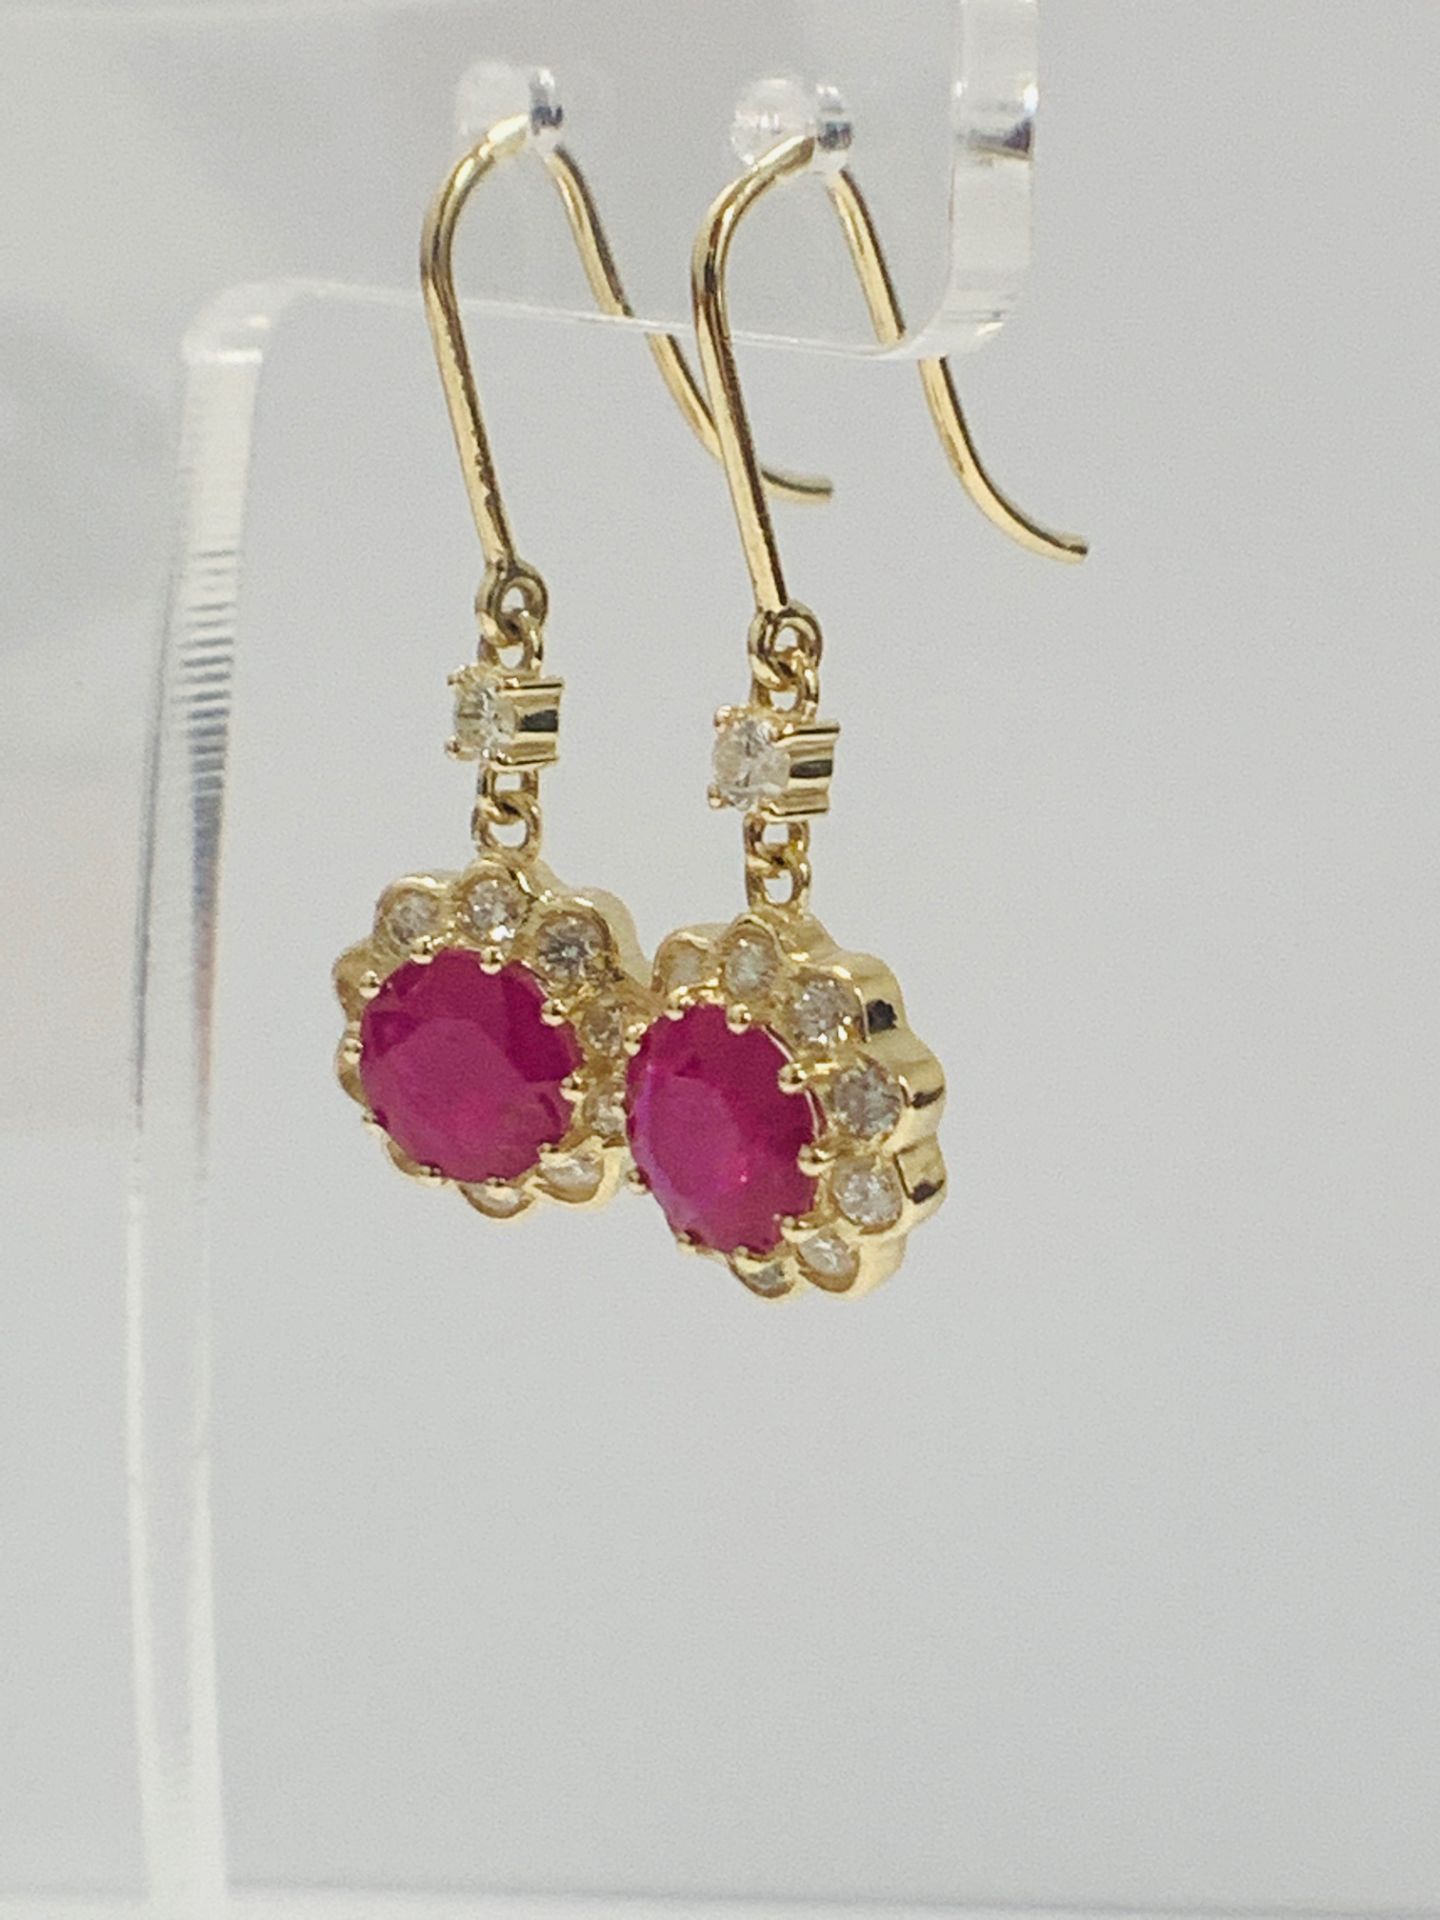 14ct Yellow Gold Ruby and Diamond earrings featuring, 2 round cut, red Rubies (2.22ct TSW) - Image 5 of 8